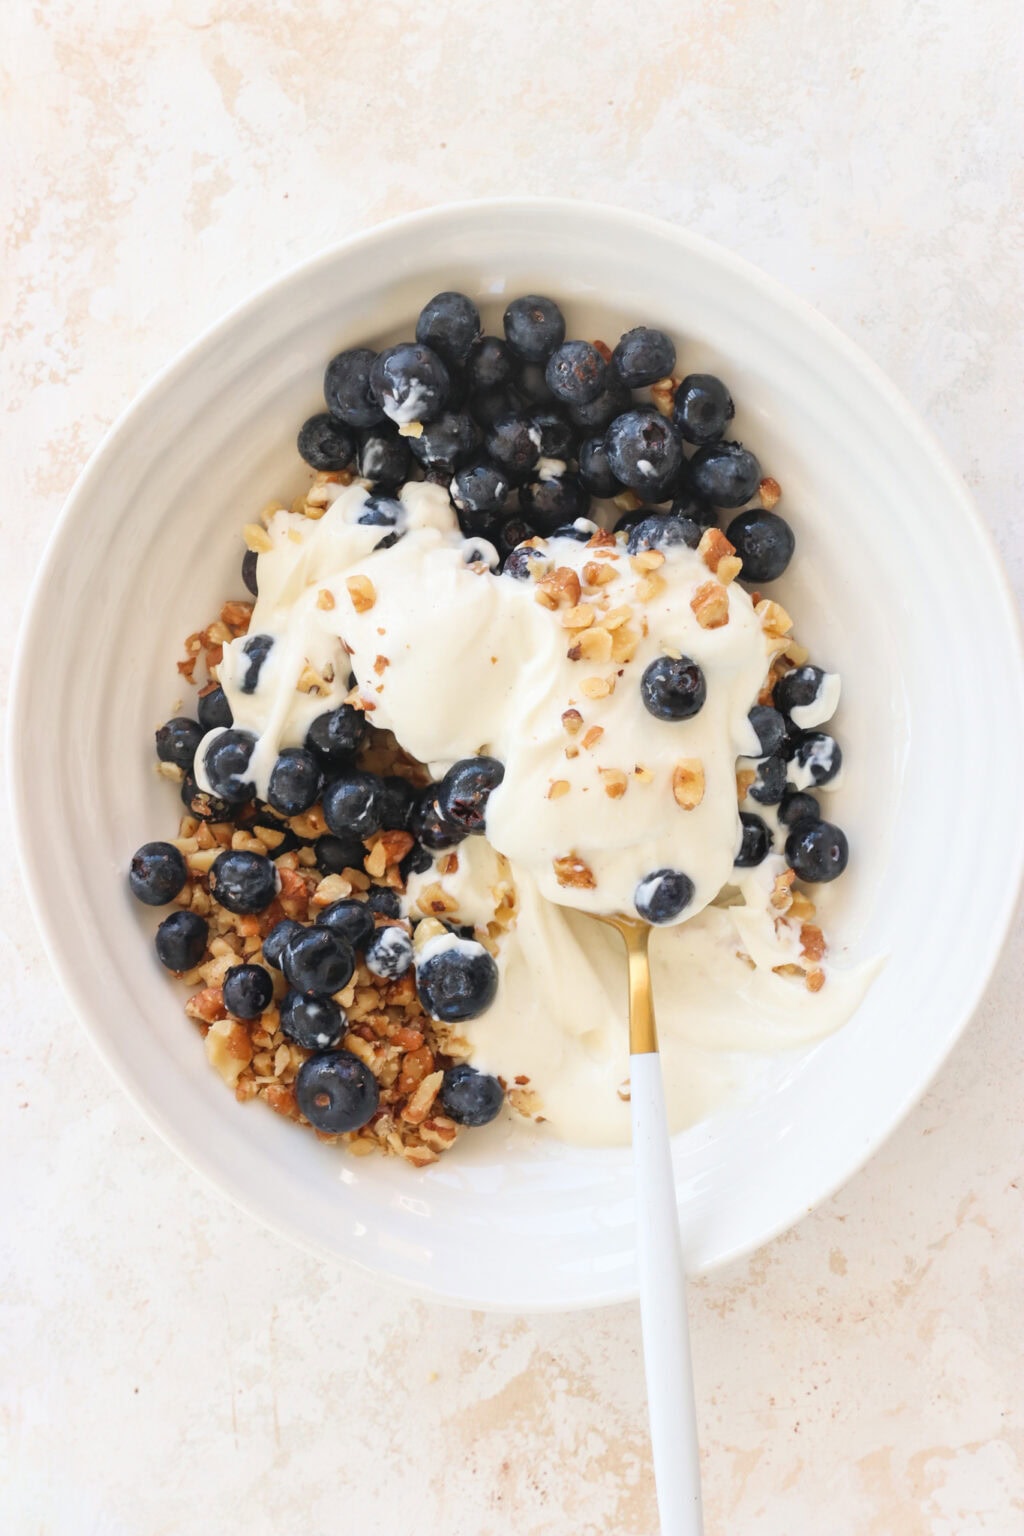 Ingredients for Frozen Blueberry Greek Yogurt Clusters added to a white bowl for mixing, including blueberries, walnuts, vanilla Greek yogurt, salt, chocolate chips, coconut oil